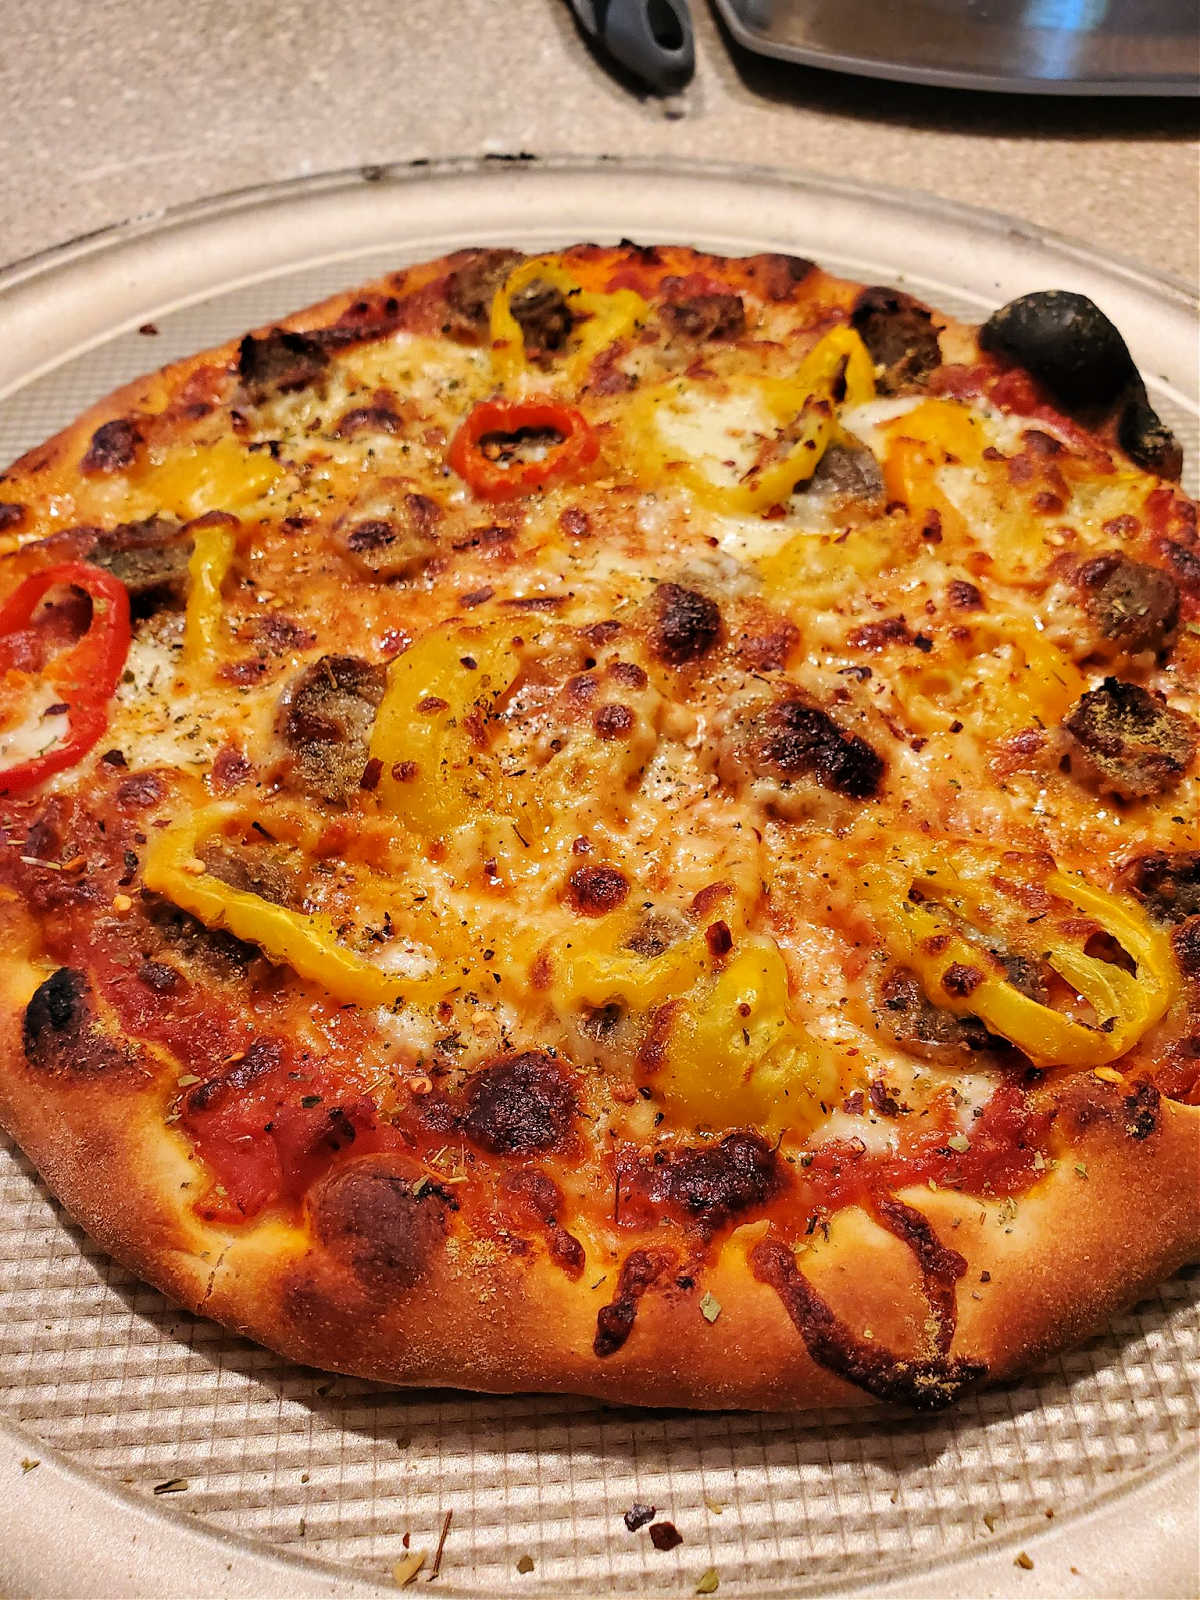 A close-up shot of a baked pizza with cheese, pickled peppers, and sliced meatballs.